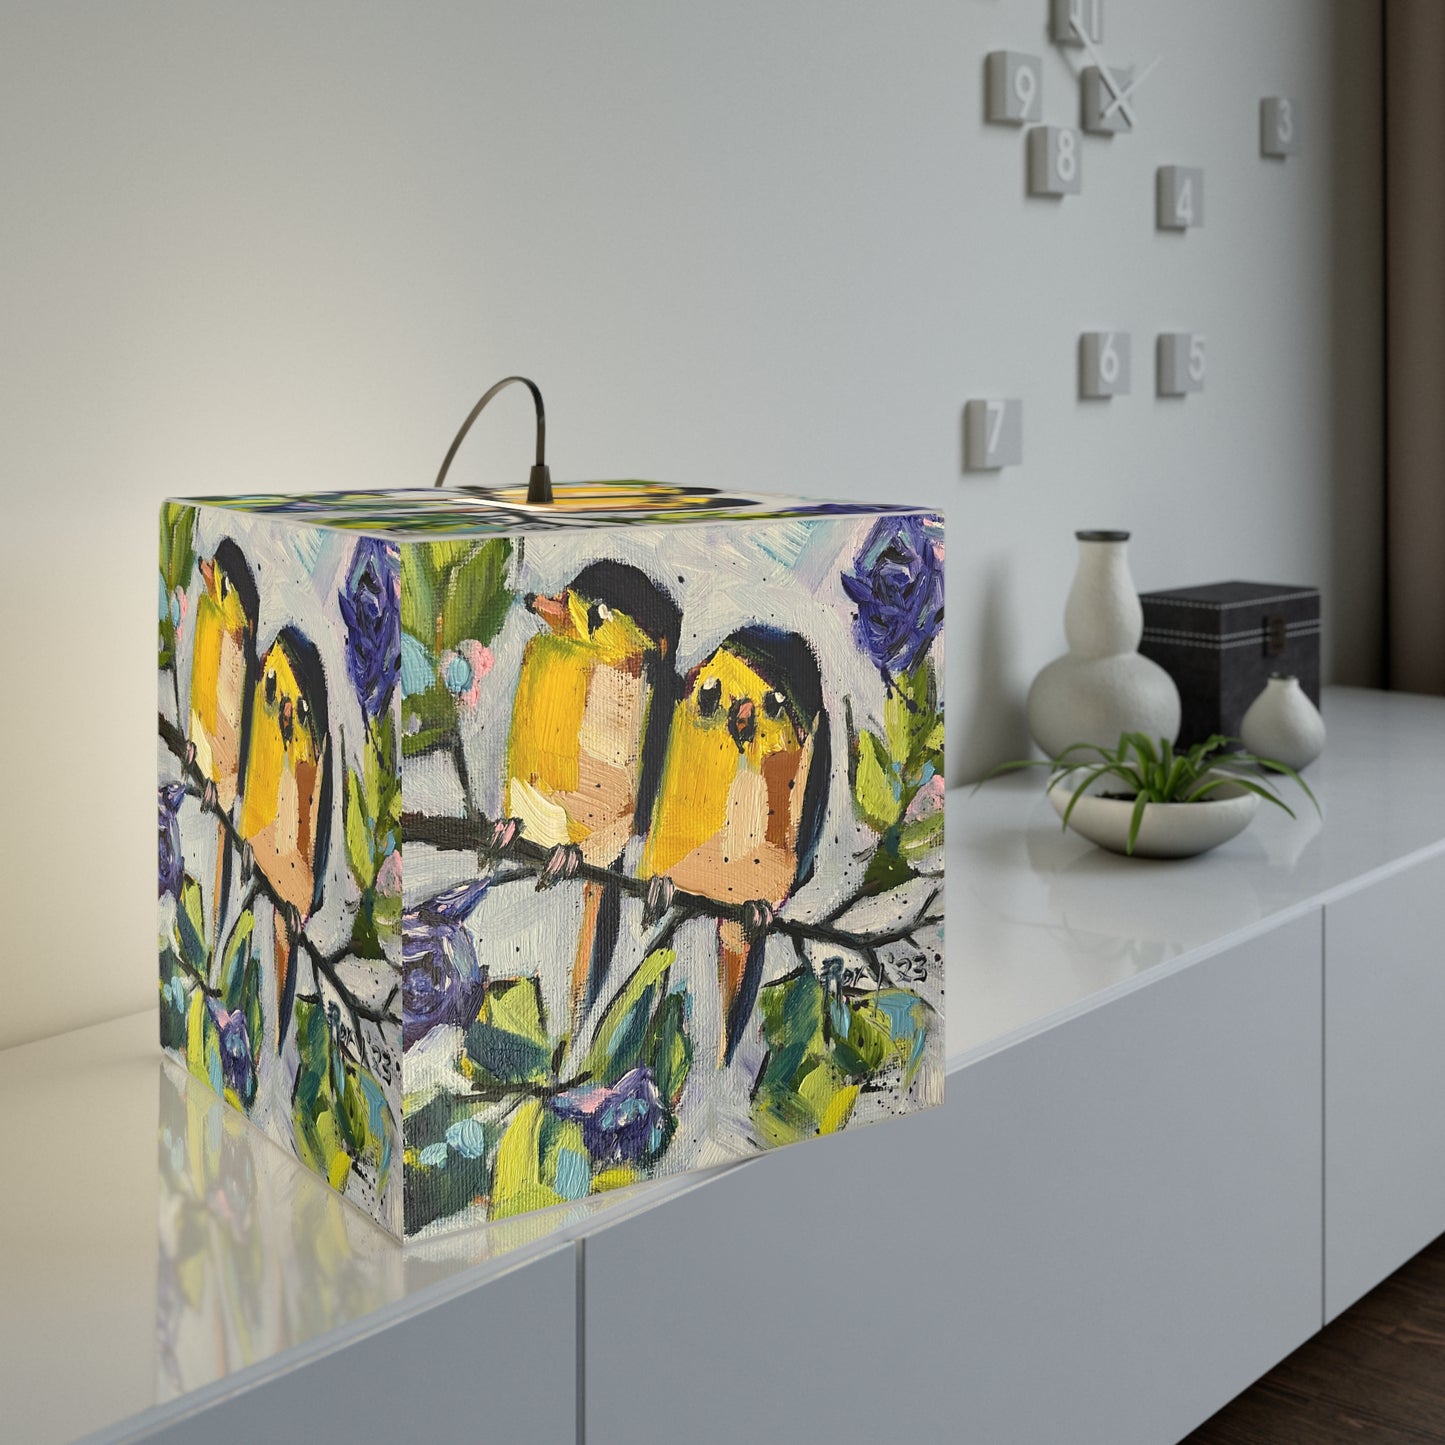 Morning Glory Goldfinches Cube Lamp